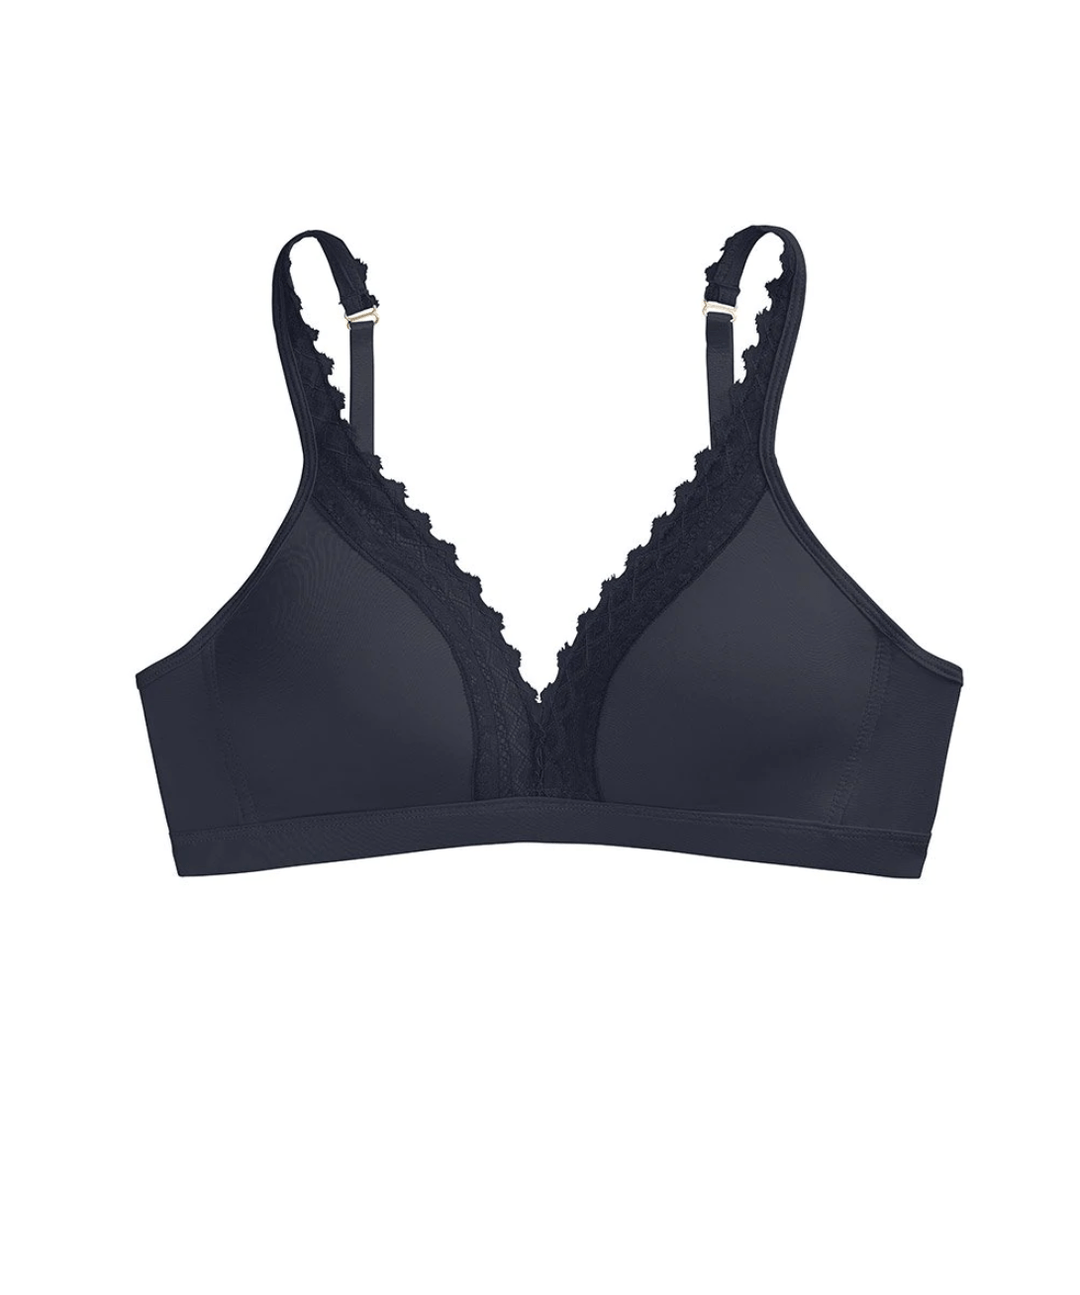 28b Size Beginners Bra - Get Best Price from Manufacturers & Suppliers in  India